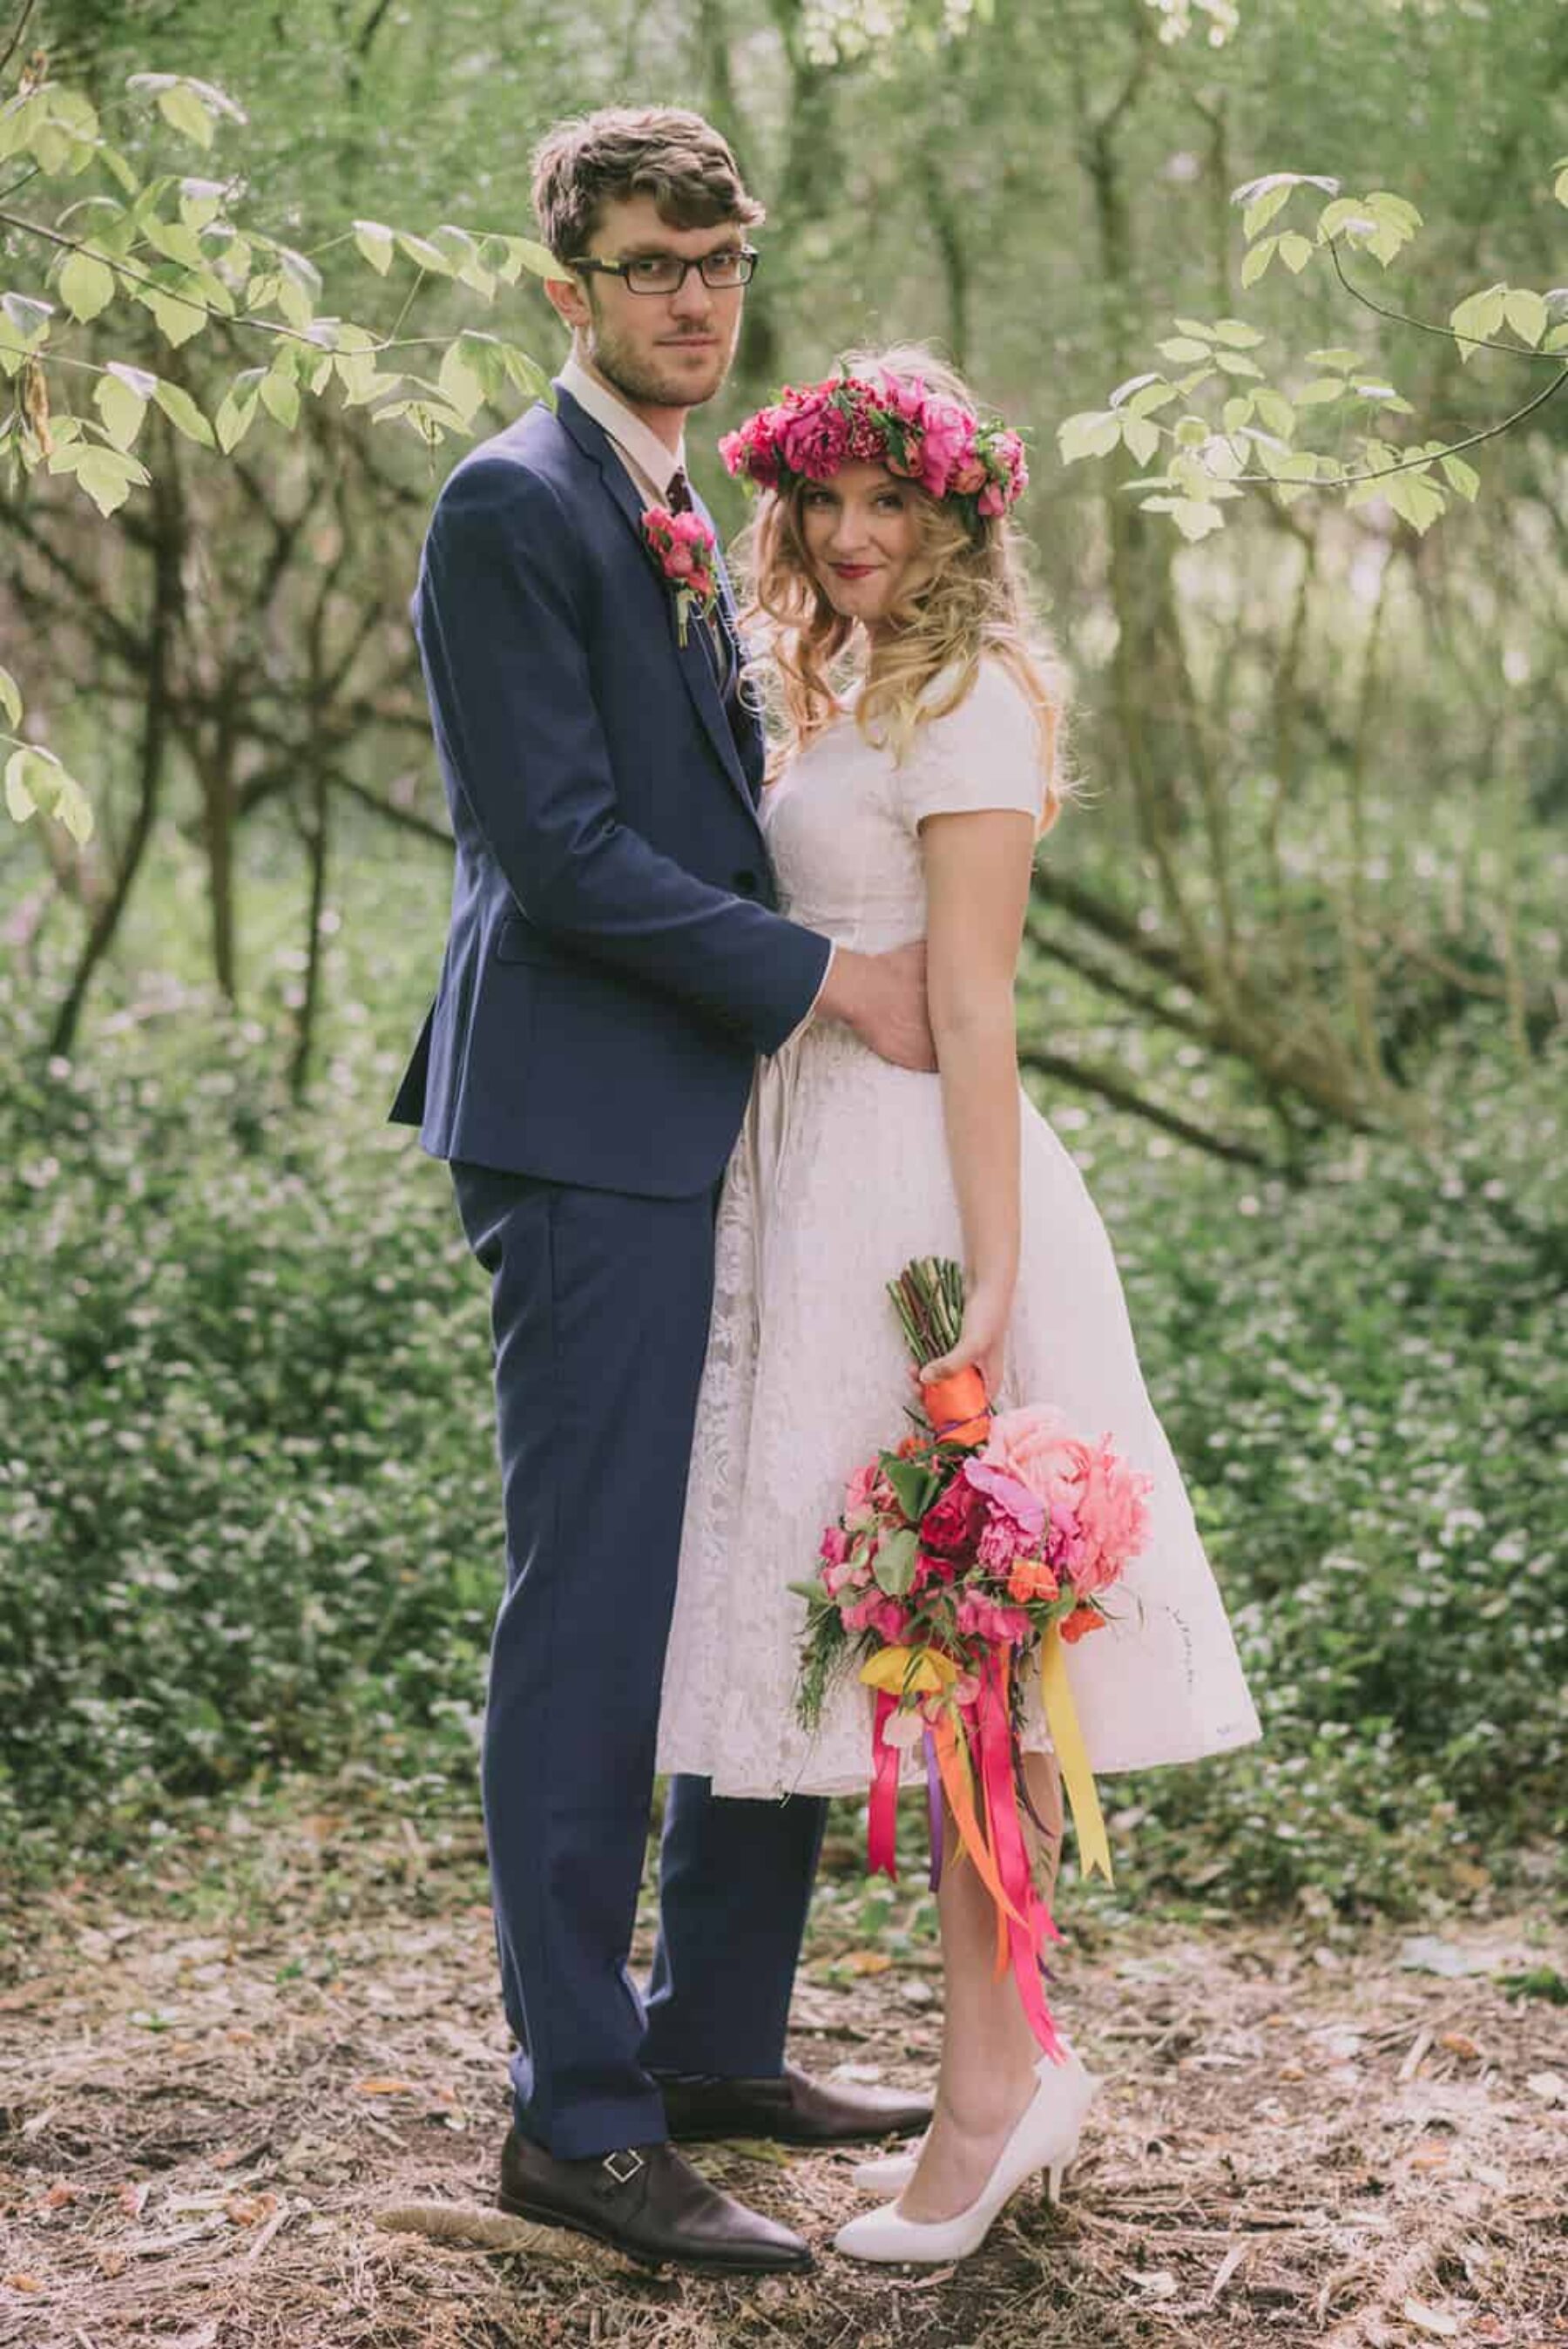 Colourful Melbourne wedding at Heide Museum